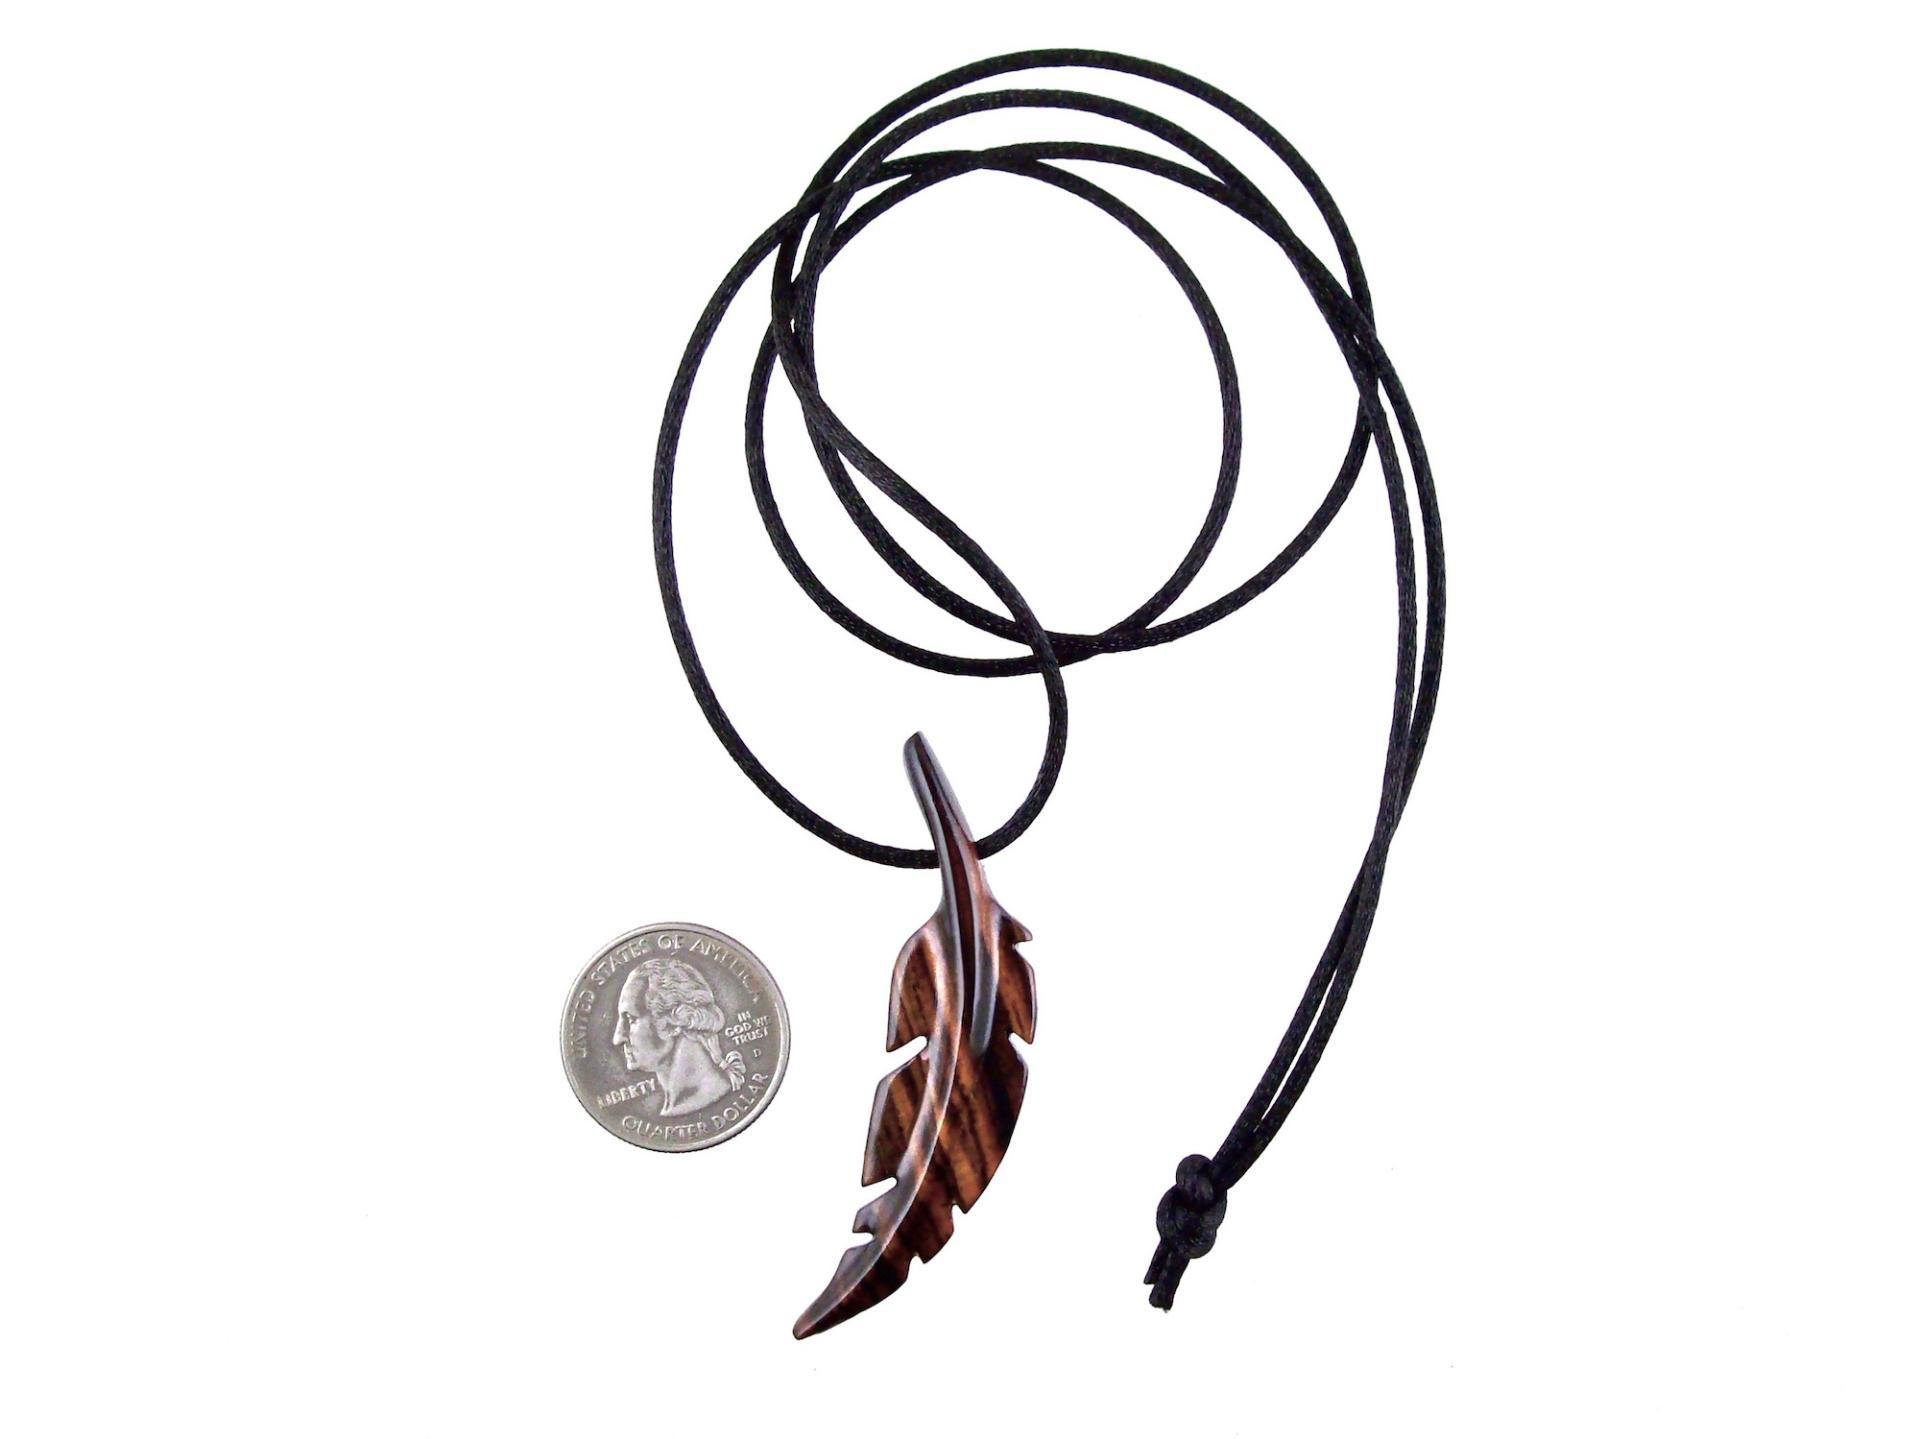 Hand Carved Feather Necklace, Wooden Feather Pendant, Mens Wood Necklace, Tribal Jewelry, One of a Kind Gift for Him